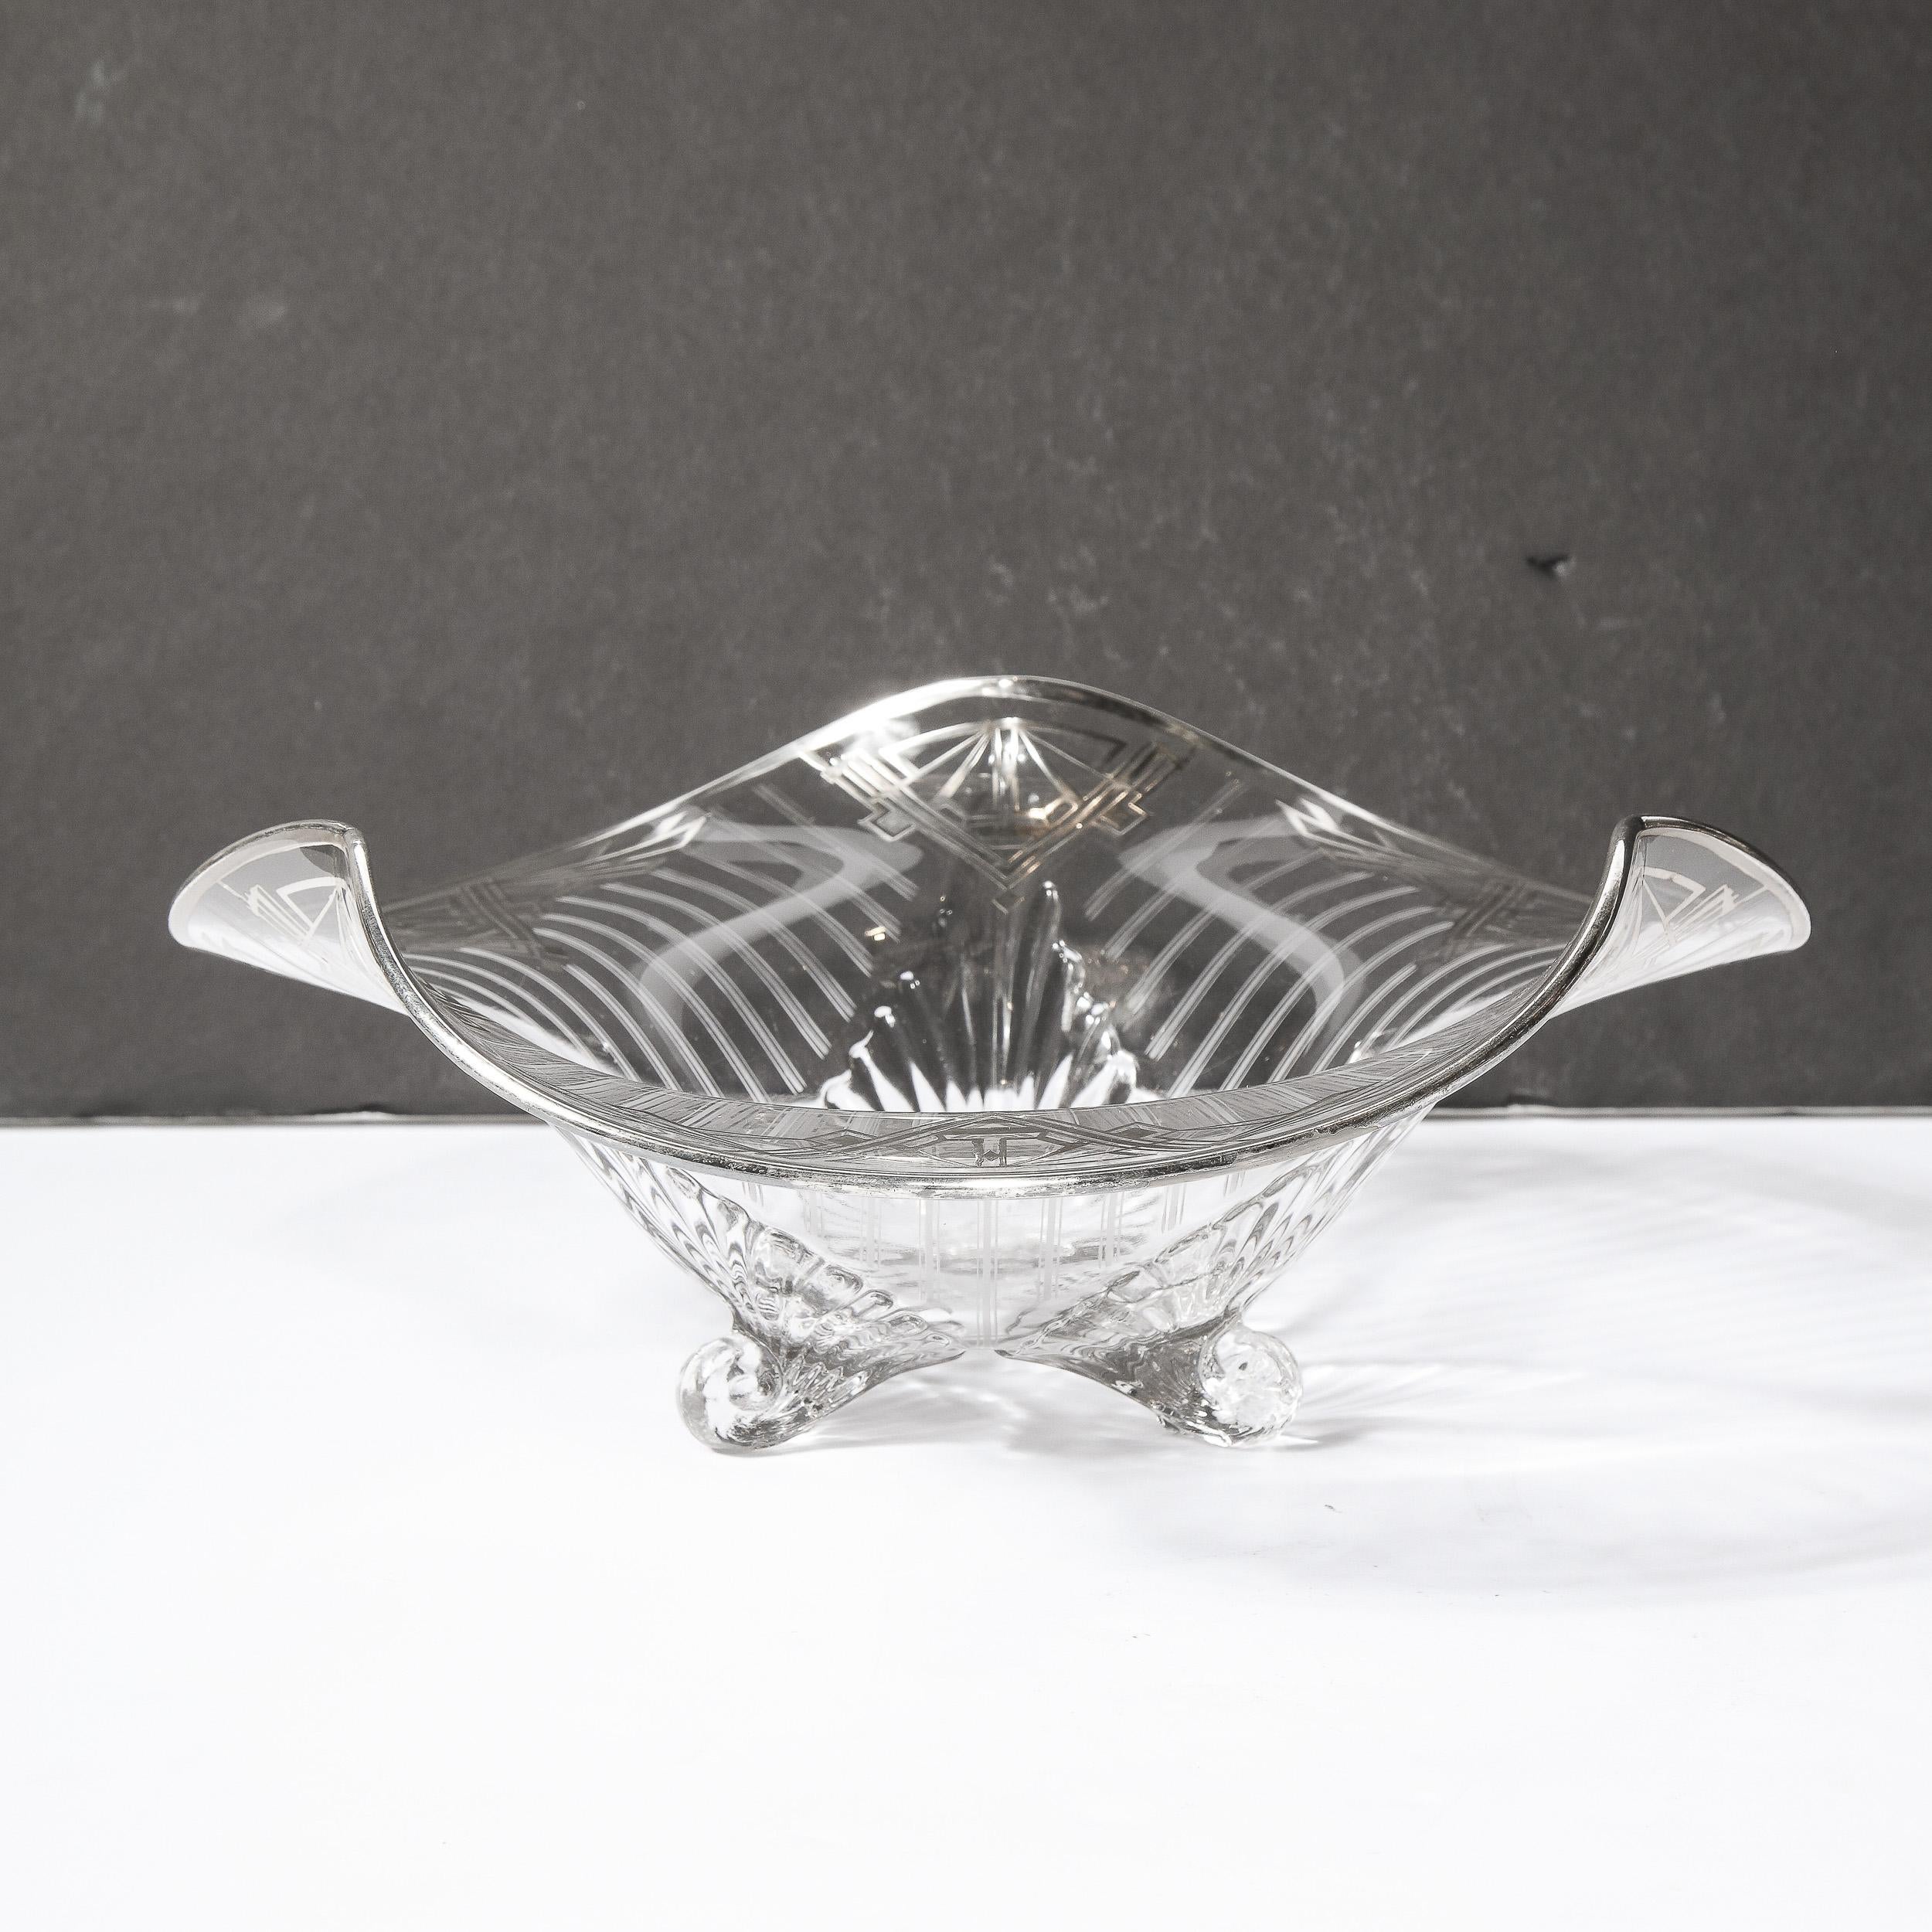 Art Deco Machine Age Translucent Glass Center Bowl with Sterling Silver Overlay For Sale 5